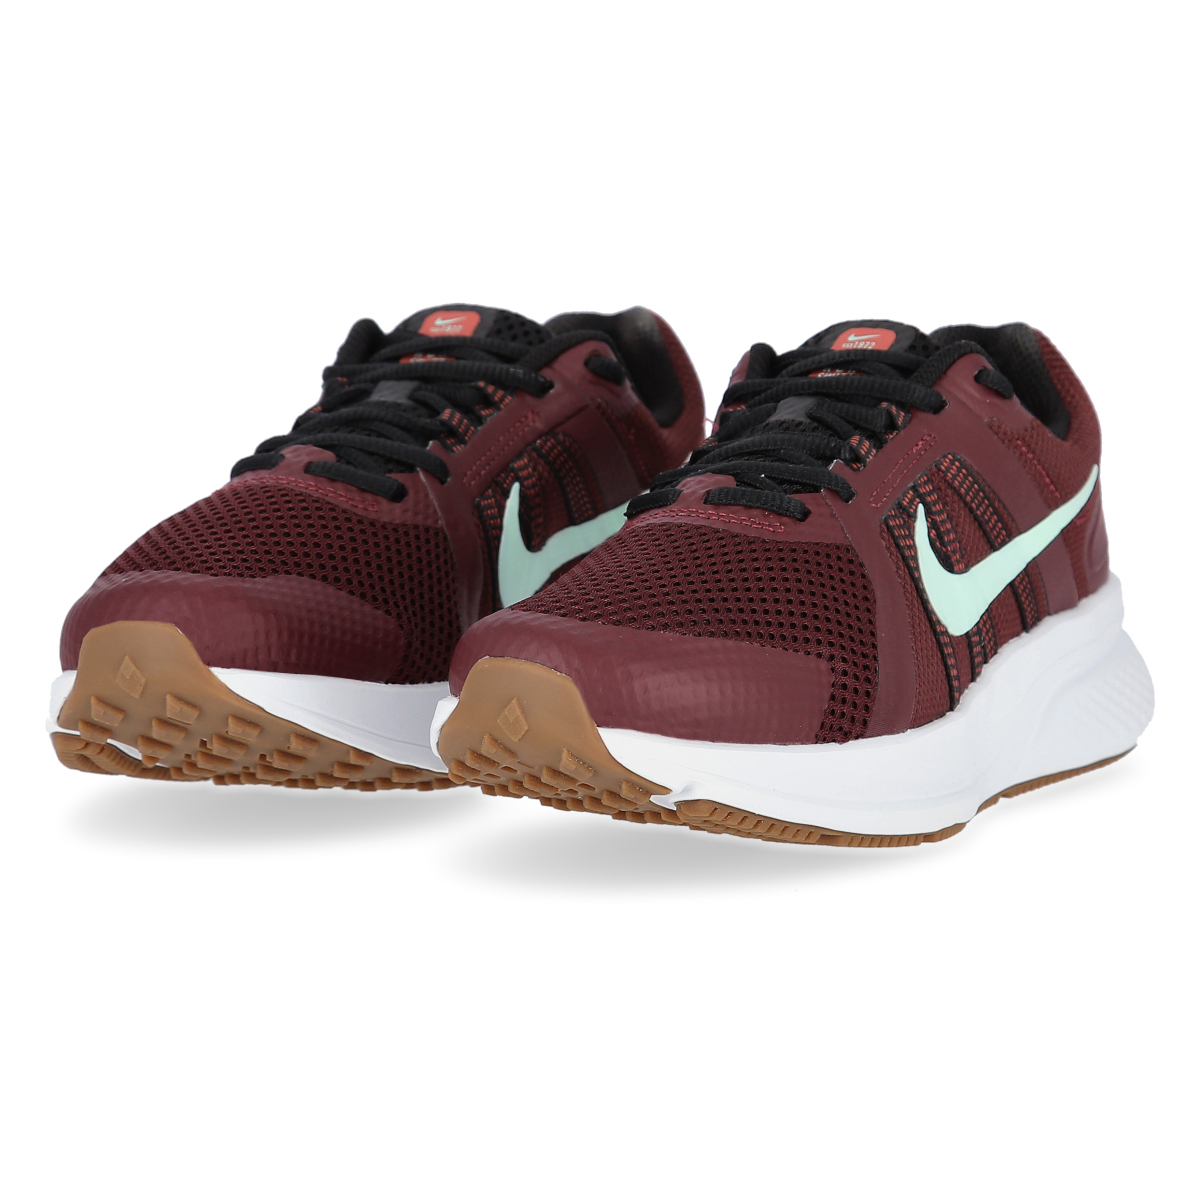 Zapatillas Nike Run Swift 2 Mujer,  image number null